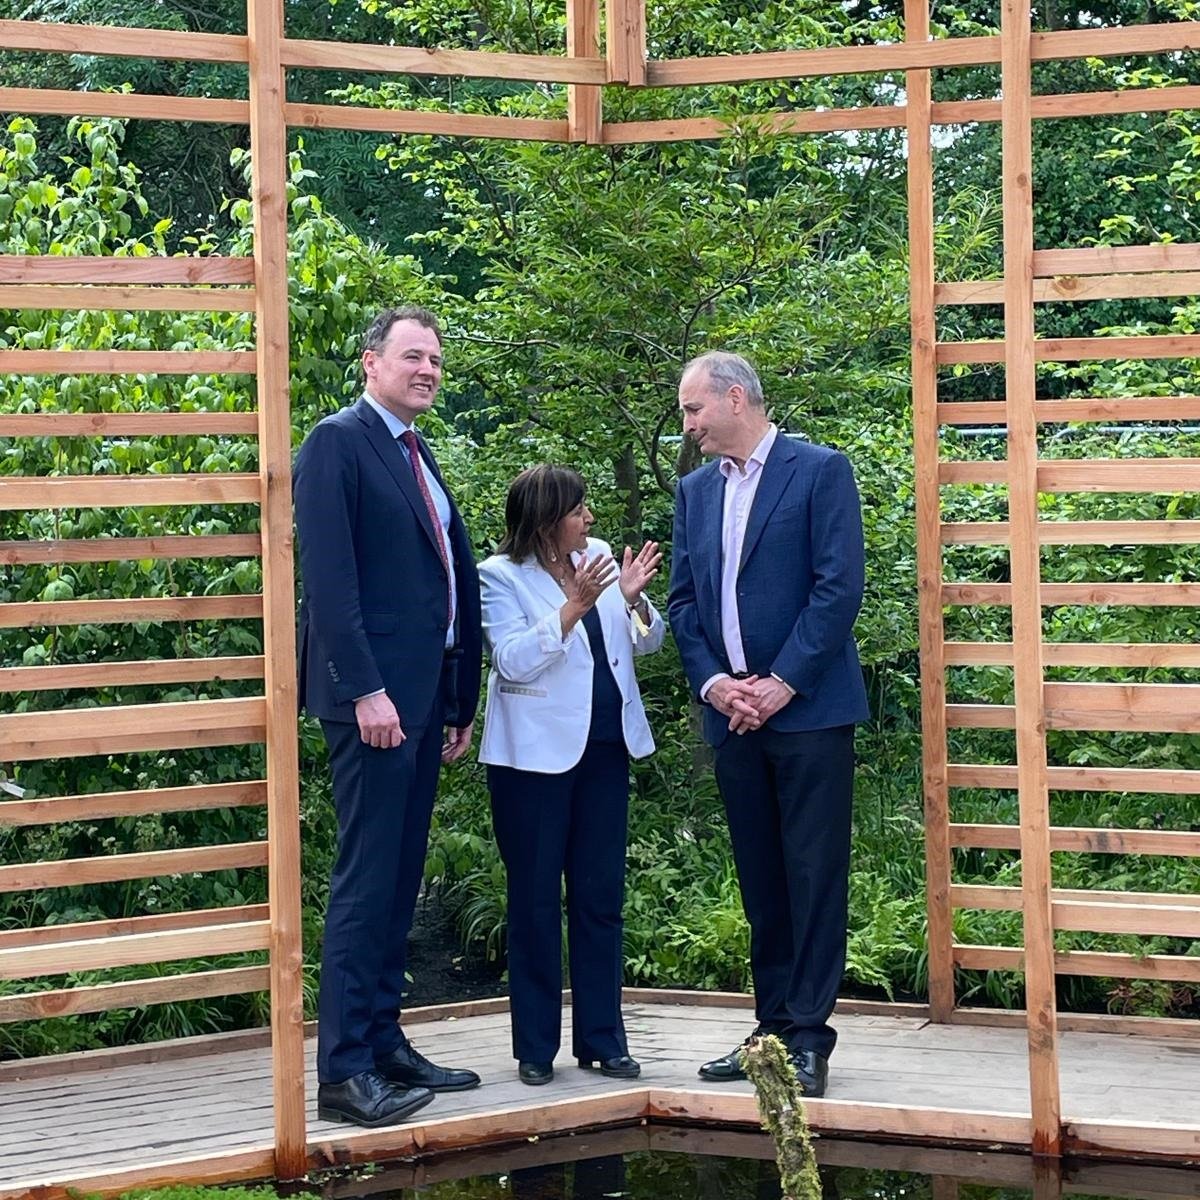 Our Head of Representation @Babsmaylou welcoming Tánaiste @MichealMartinTD and Minister for Agriculture @McConalogue to the @EU_Commission's 'In Perspective' Garden at @BordBiaBloom today 👇

#EUGreenDeal
#EUDelivers
#NewEuropeanBauhaus